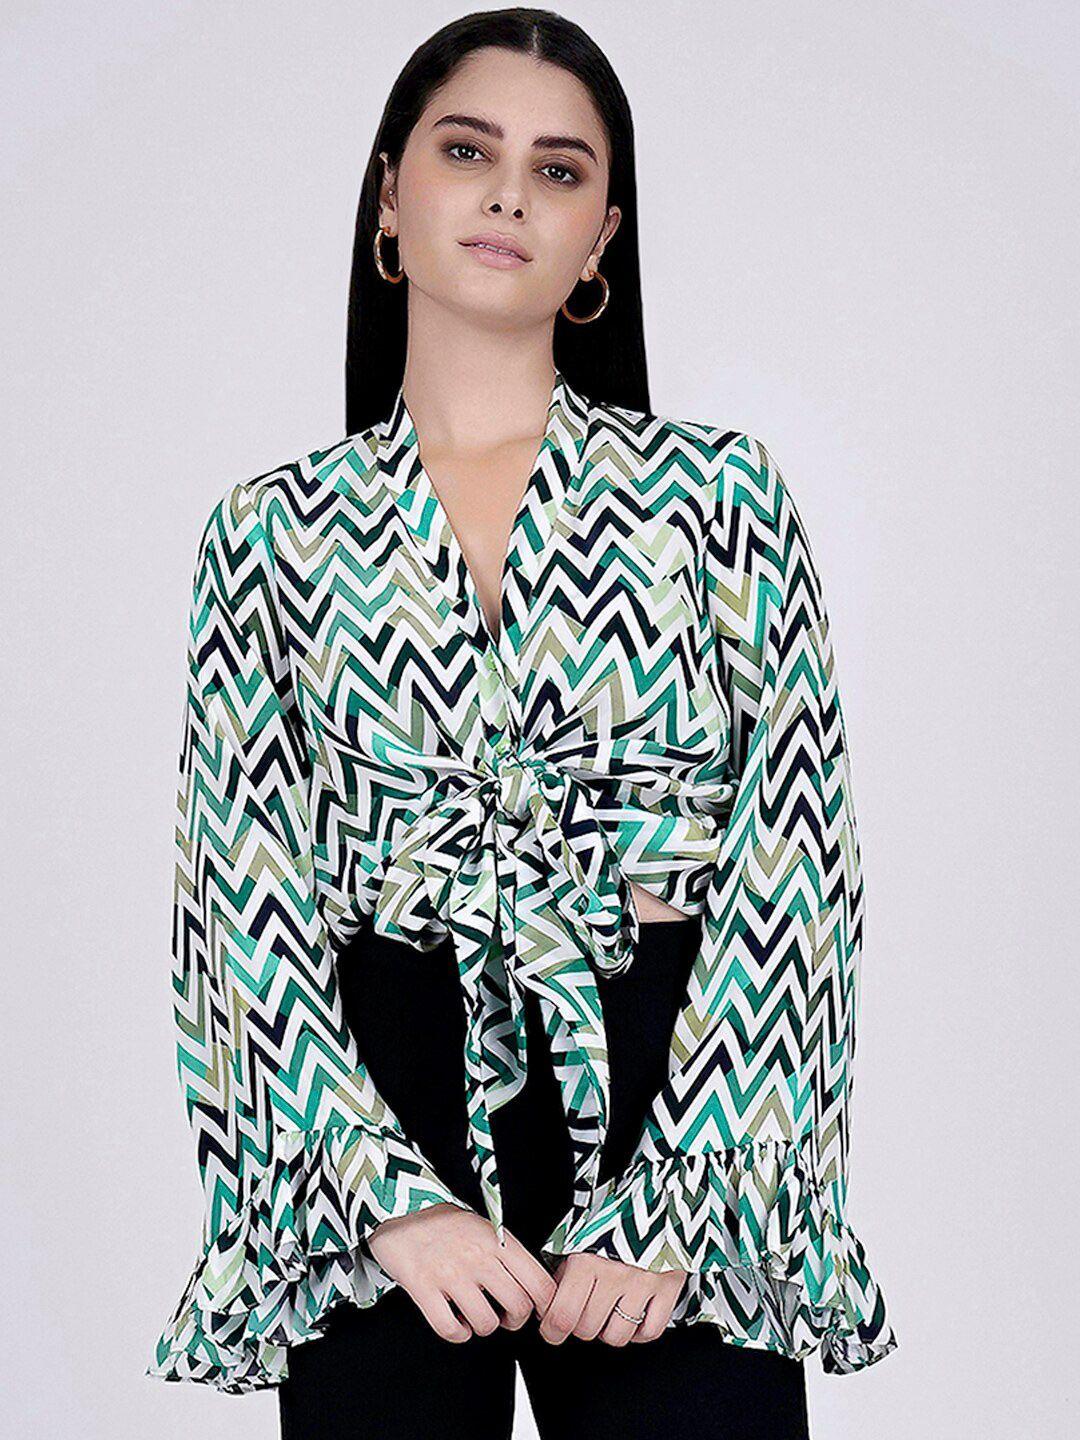 first resort by ramola bachchan horizontal striped flared sleeves shirt style top